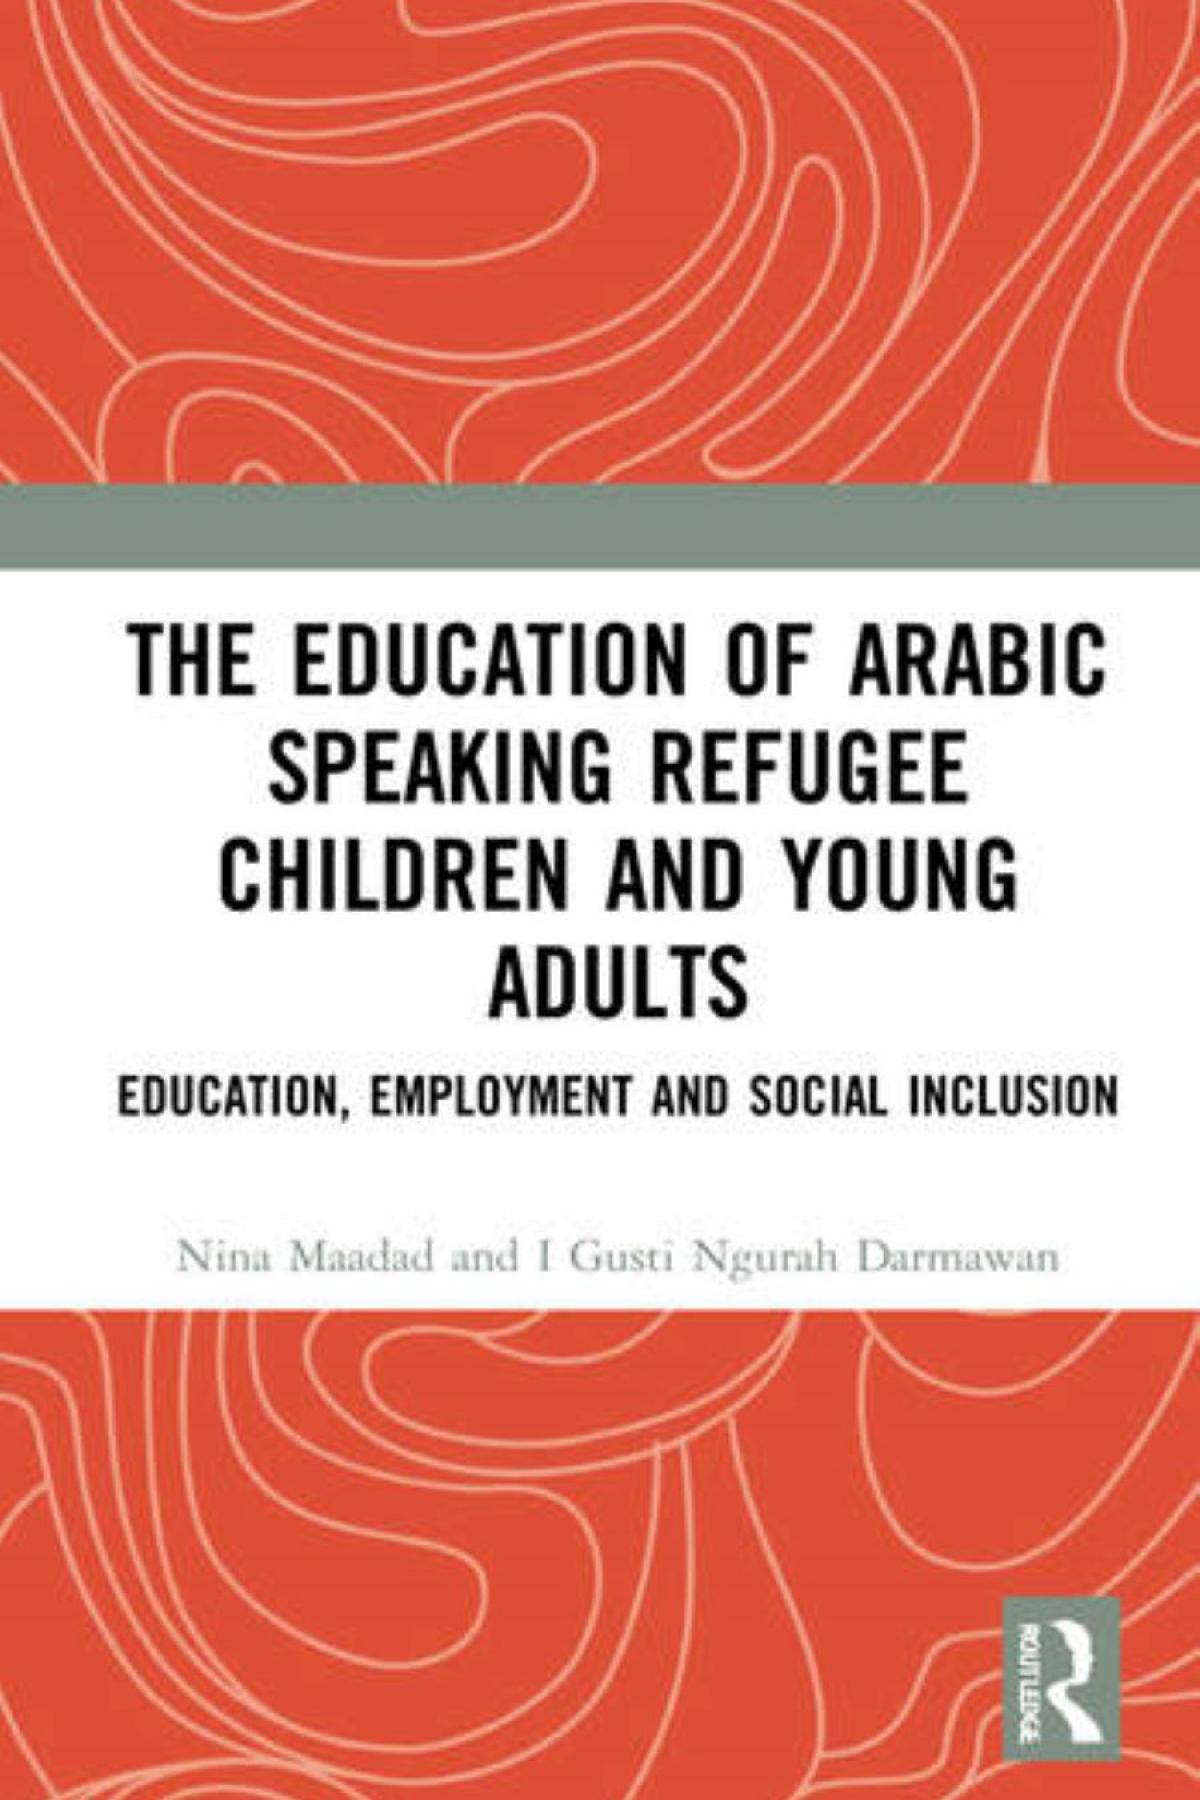 The Education of Arabic Speaking Refugee Children and Young Adults: Education, Employment and Social Inclusion